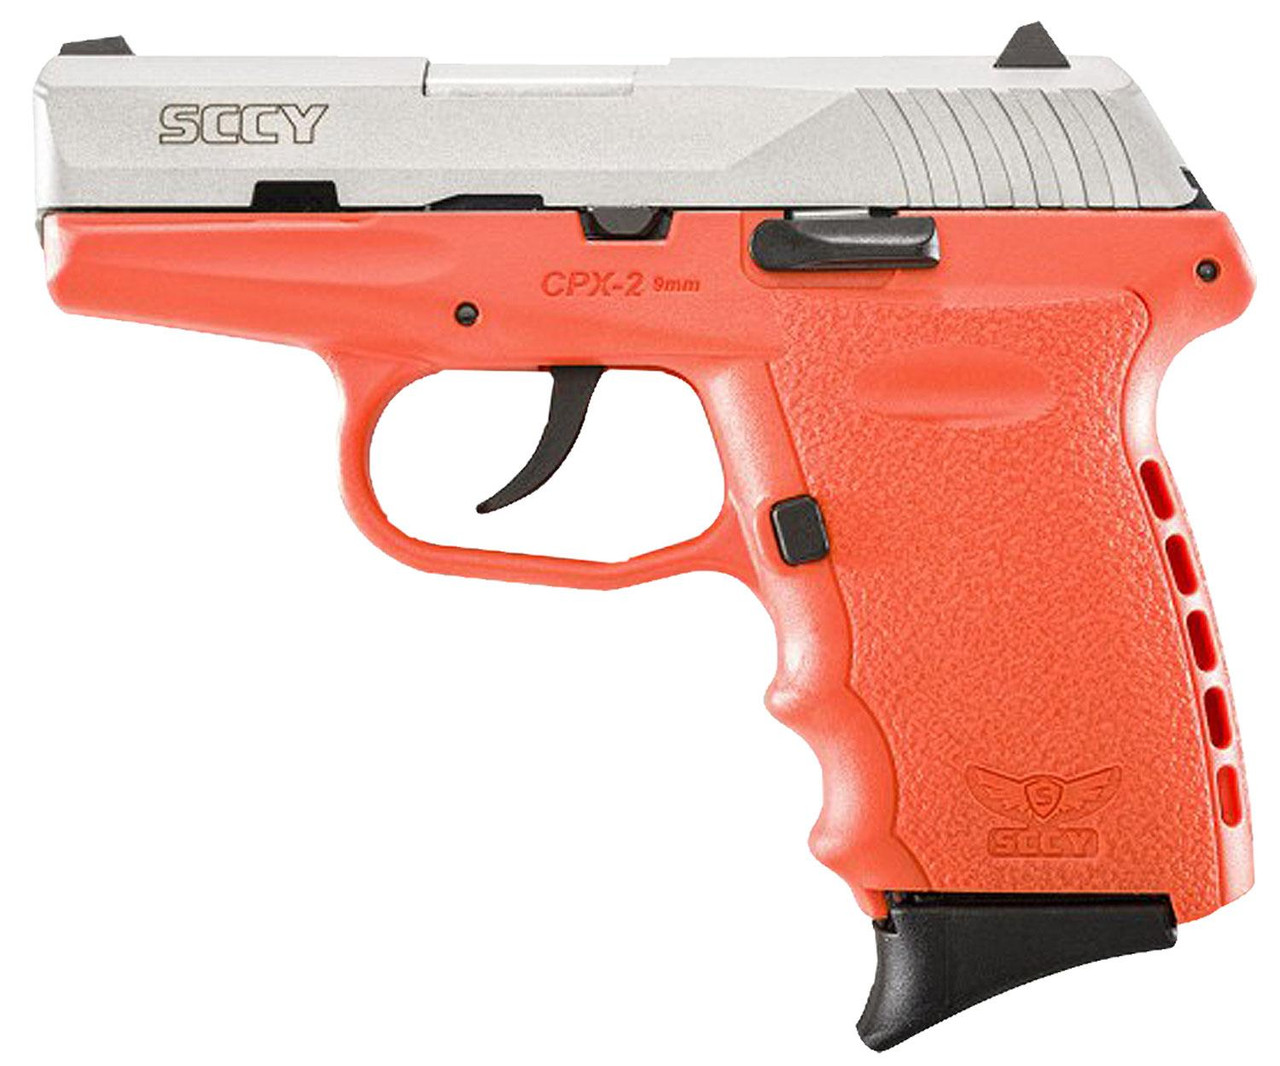 SCCY CPX-2 Orange Stainless